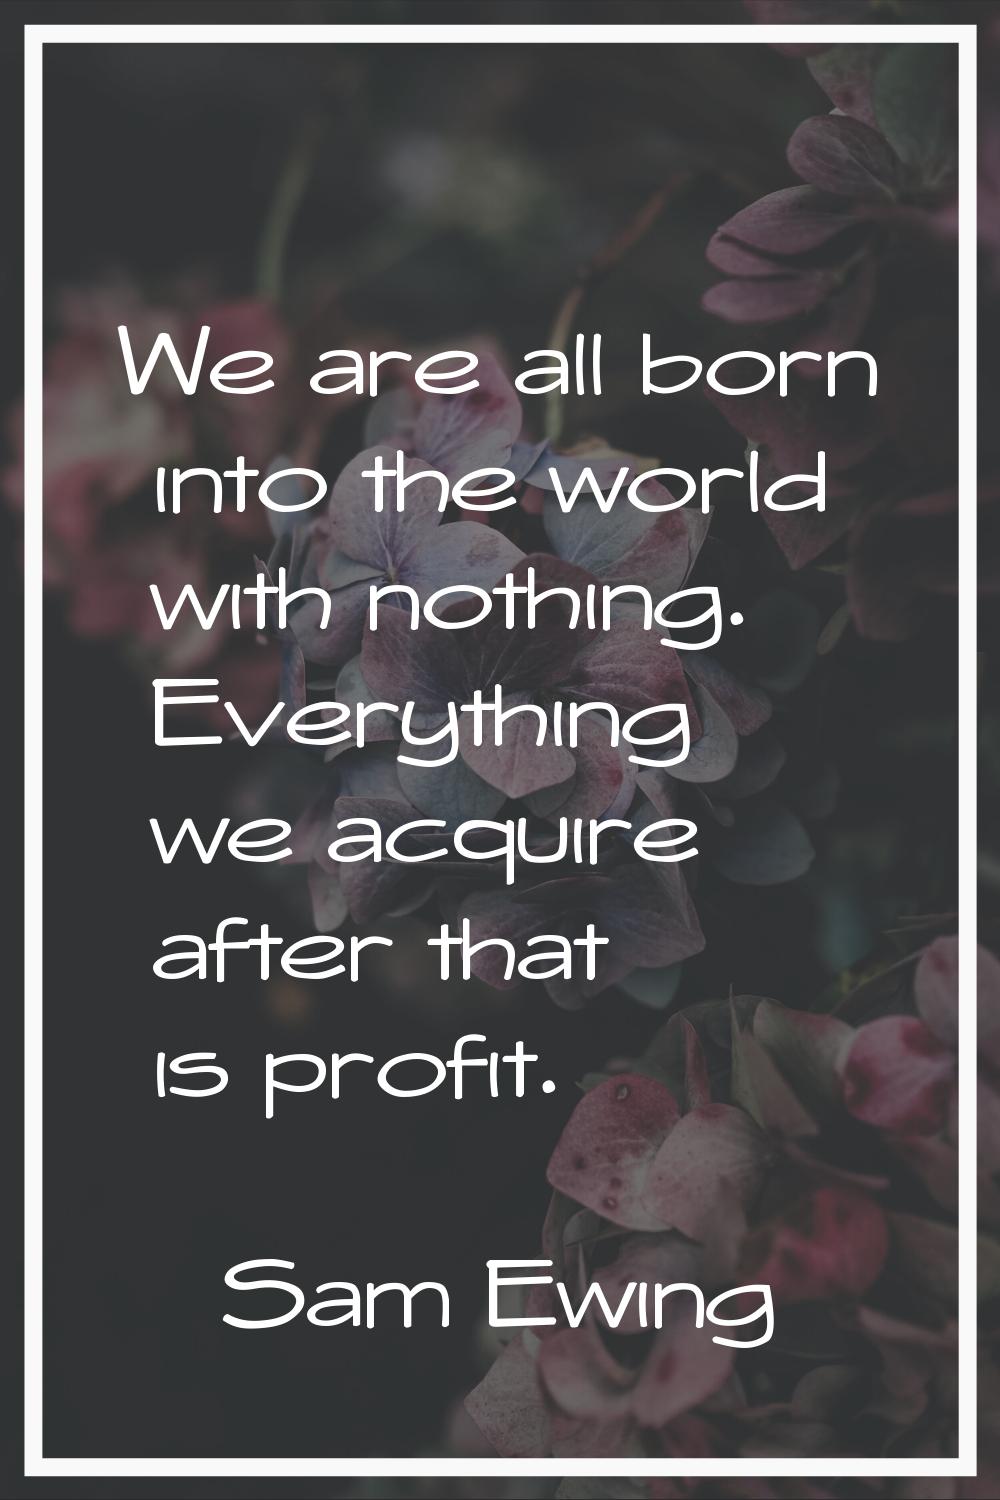 We are all born into the world with nothing. Everything we acquire after that is profit.